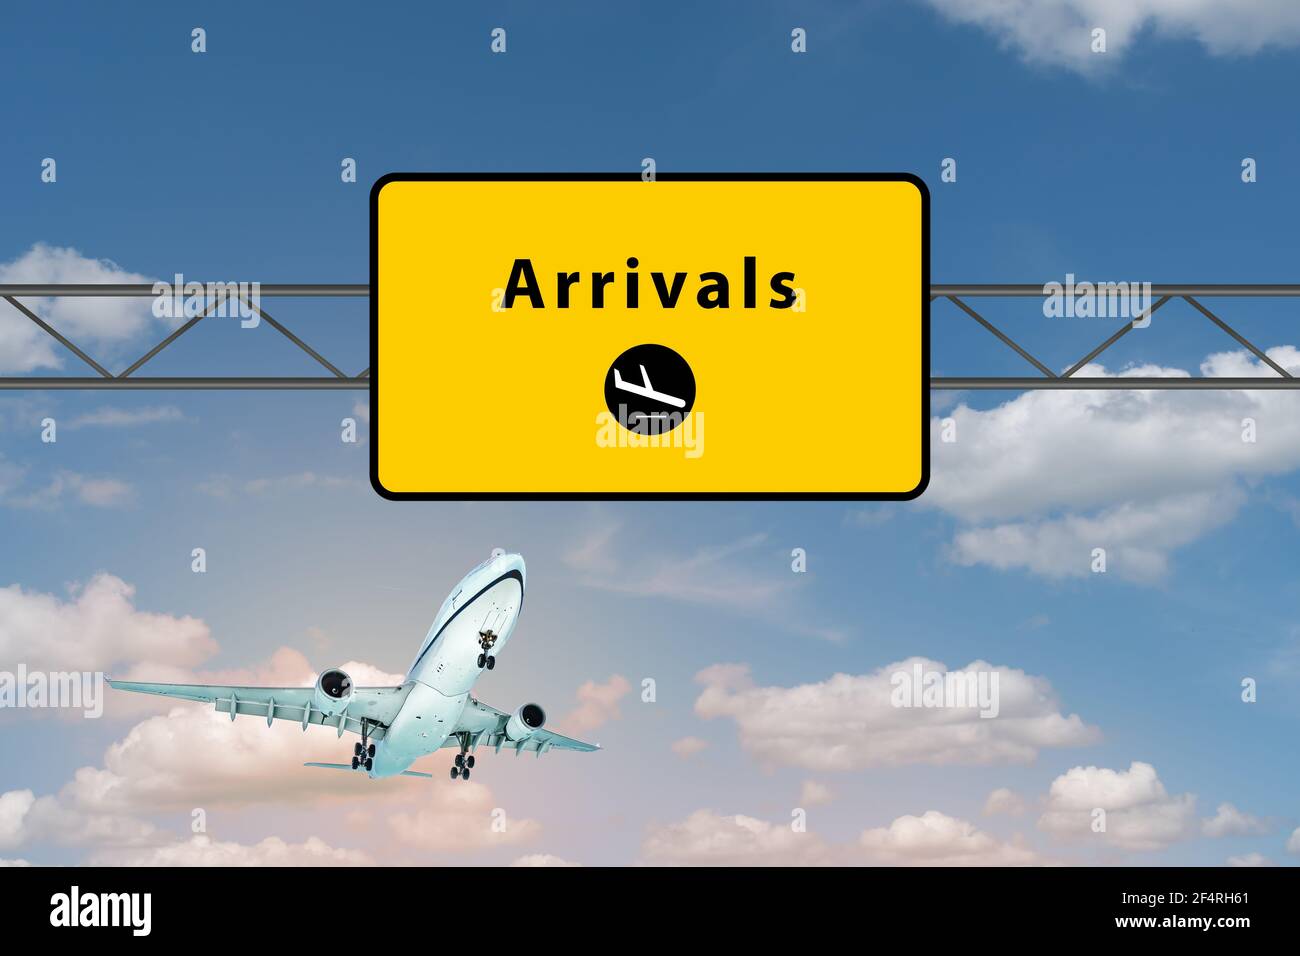 Arrivals airport sign above highway. Landing airplane in the sky. Stock Photo